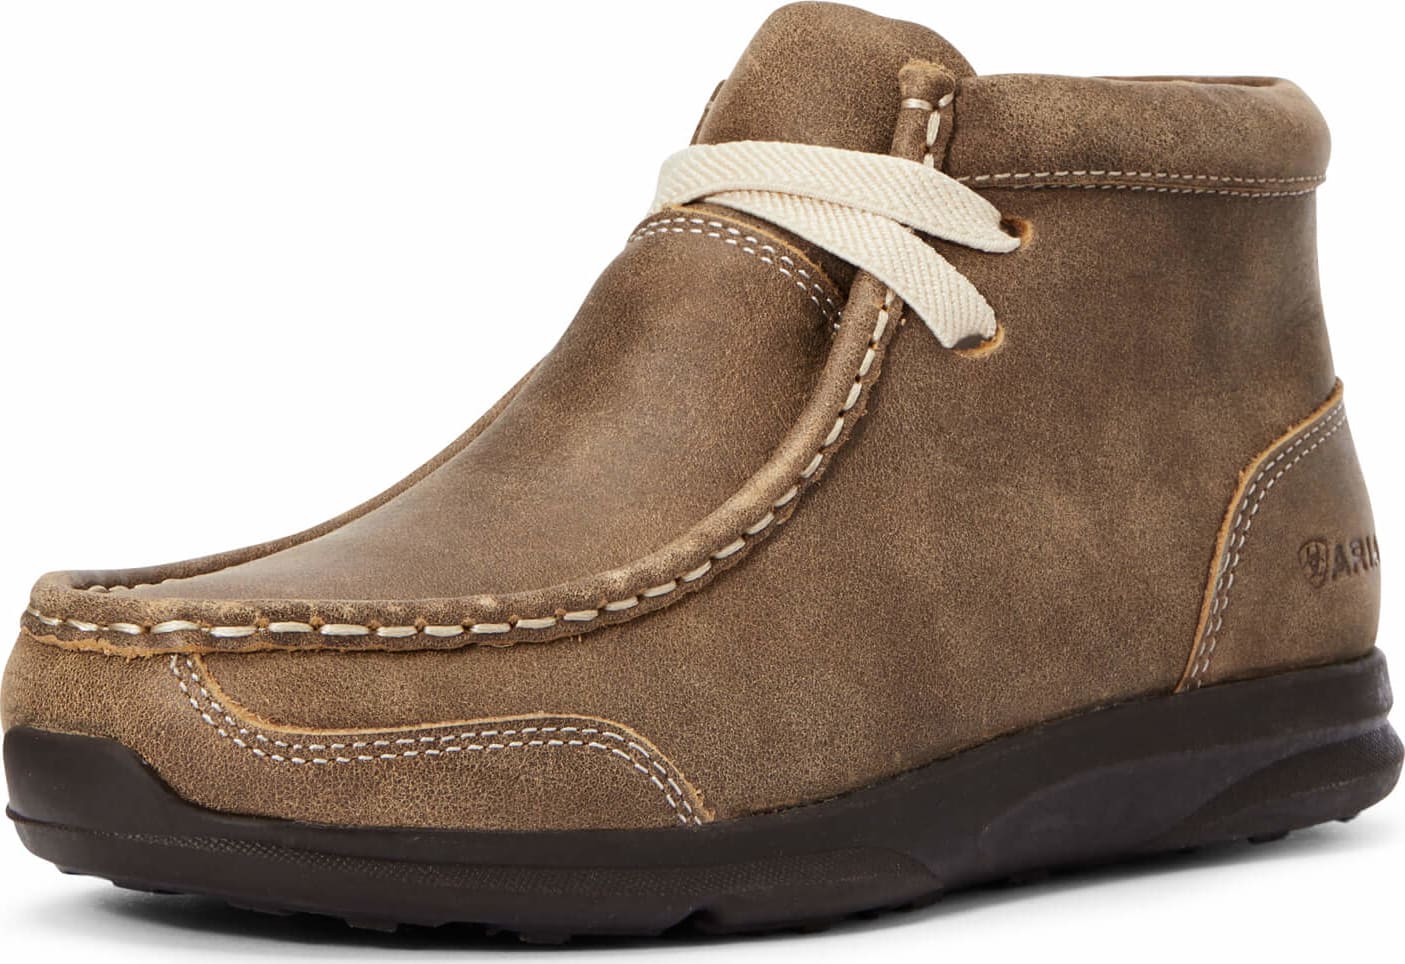 Youth Ariat Spitfire-Brown Bomber